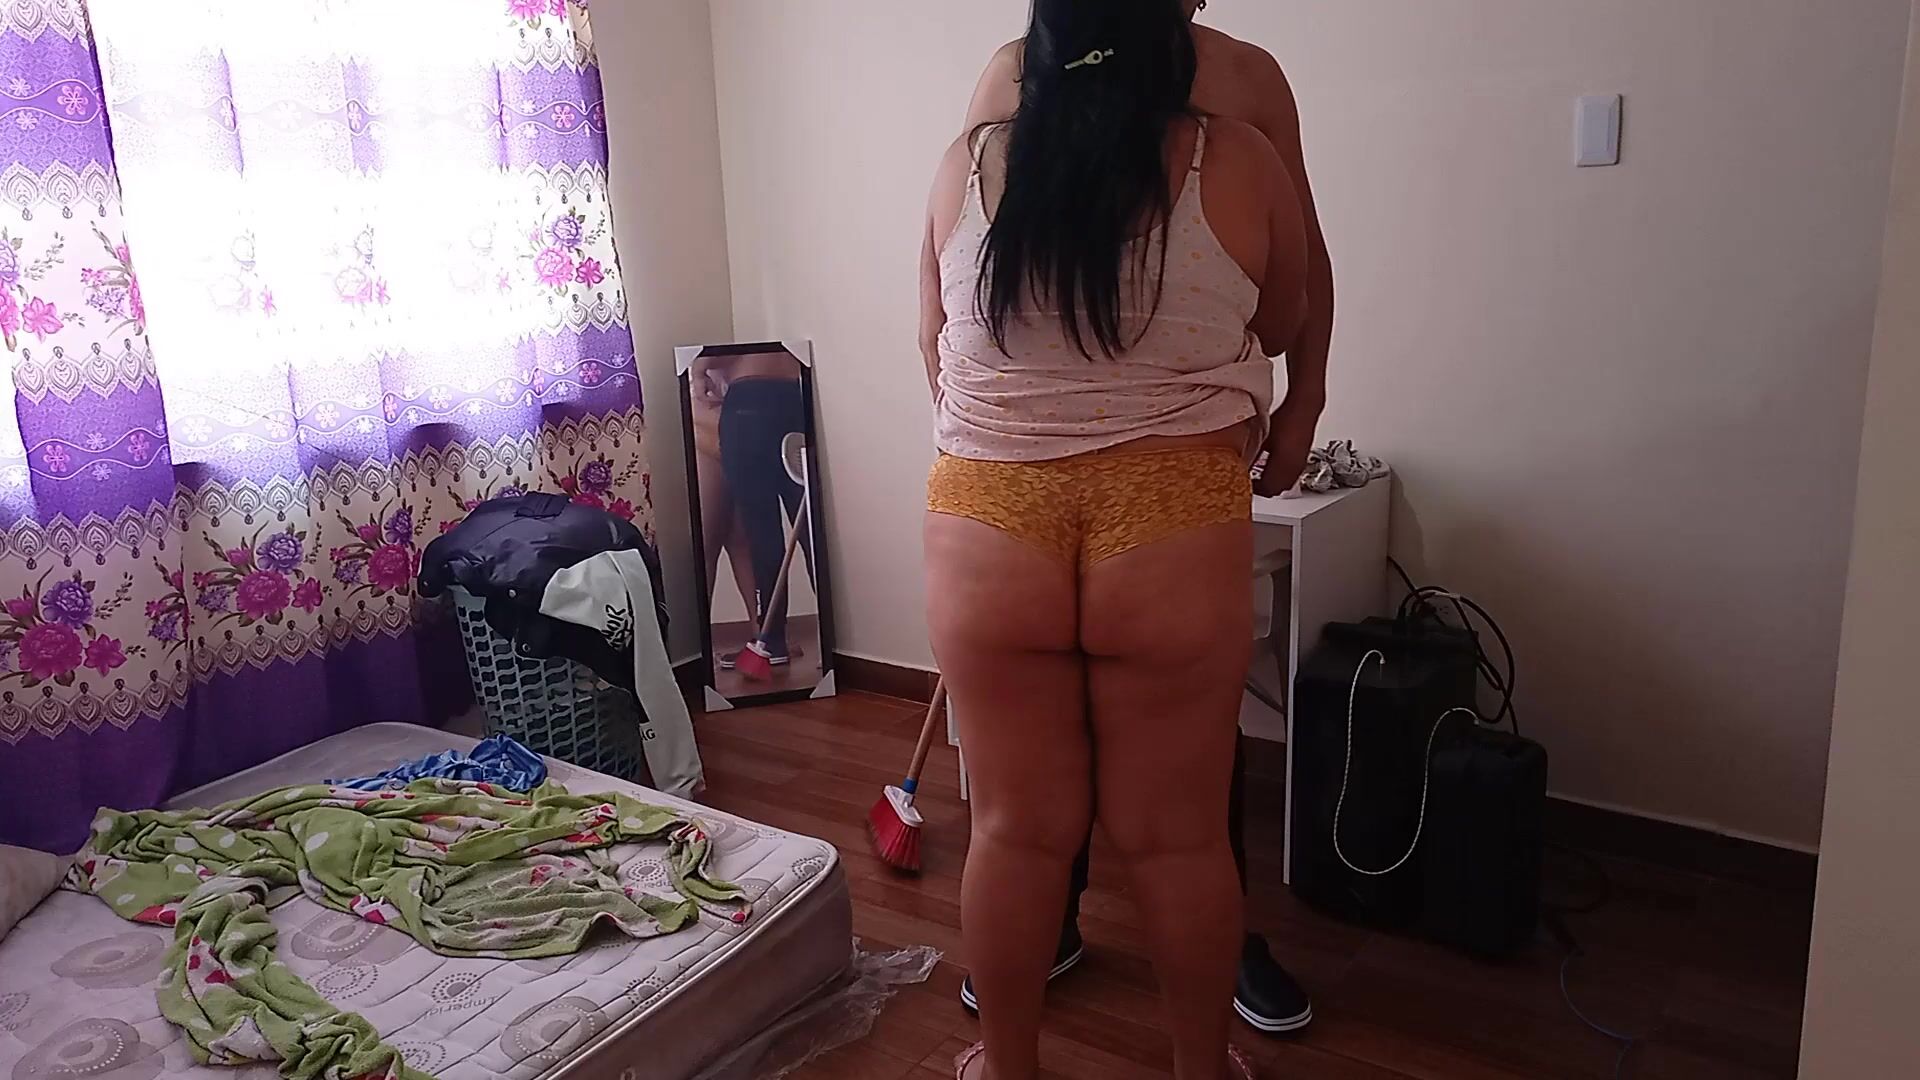 The cleaning girl enters my room and I manage to seduce her I put a hidden camera I record all that fucking that Chubby so rich very good blowjob watch online image